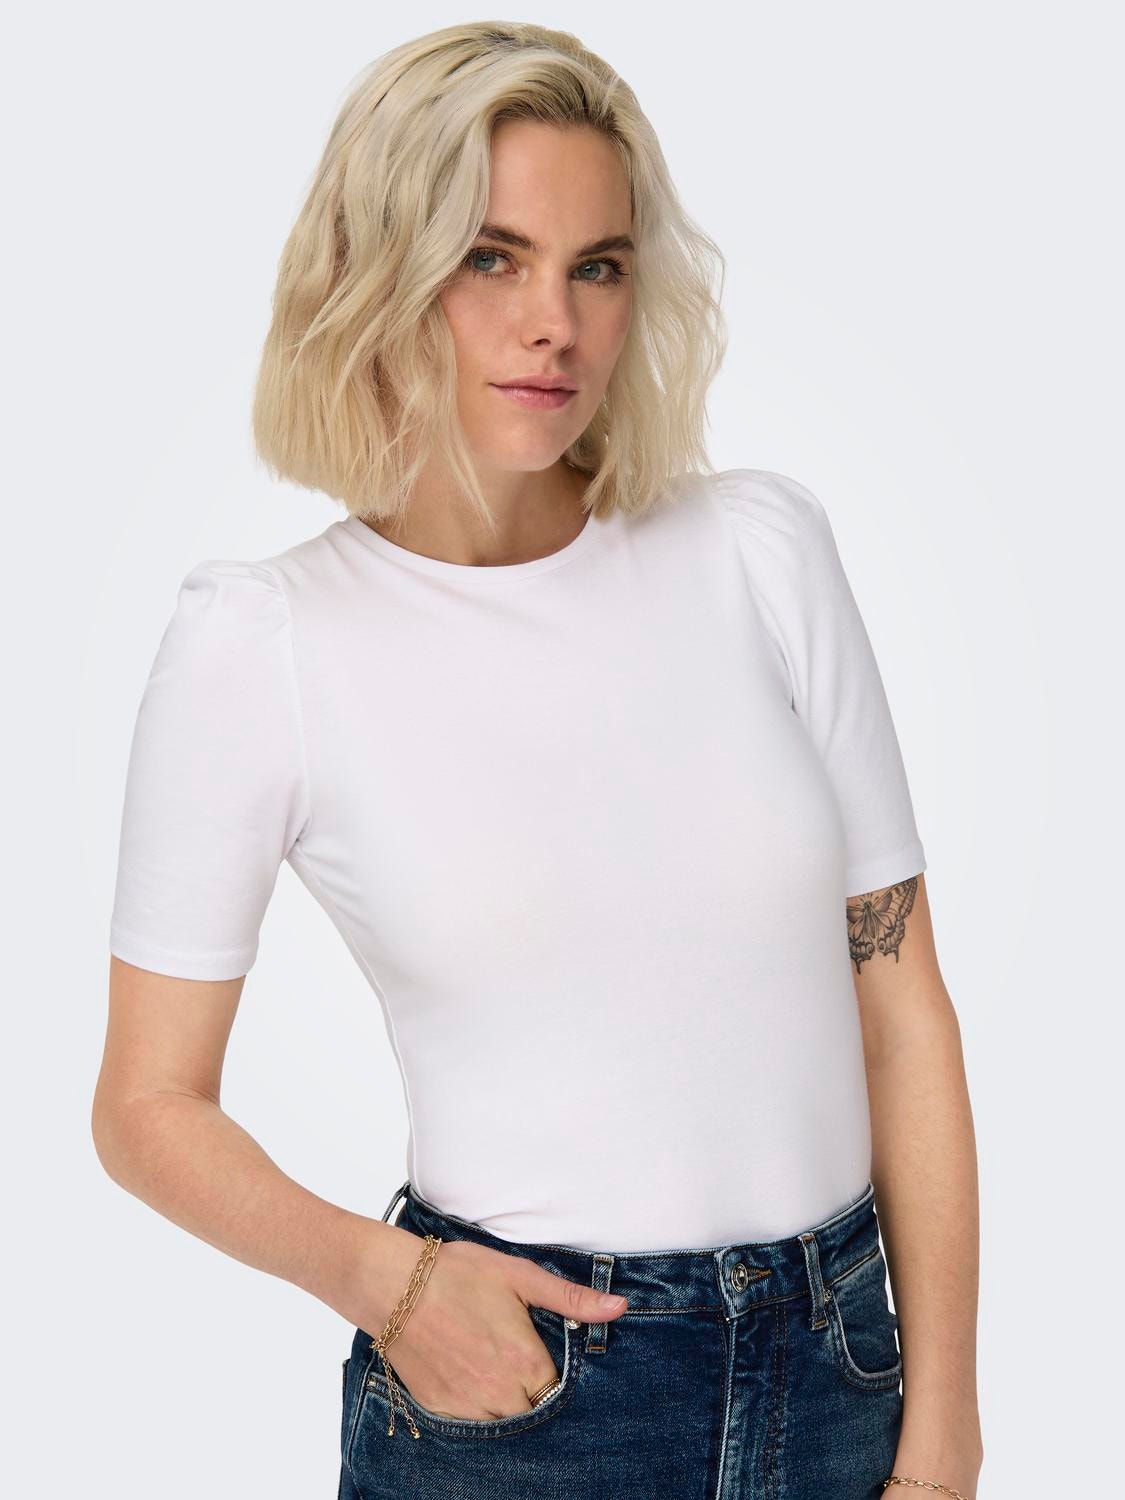 ONLY O-hals top -White - 15282484